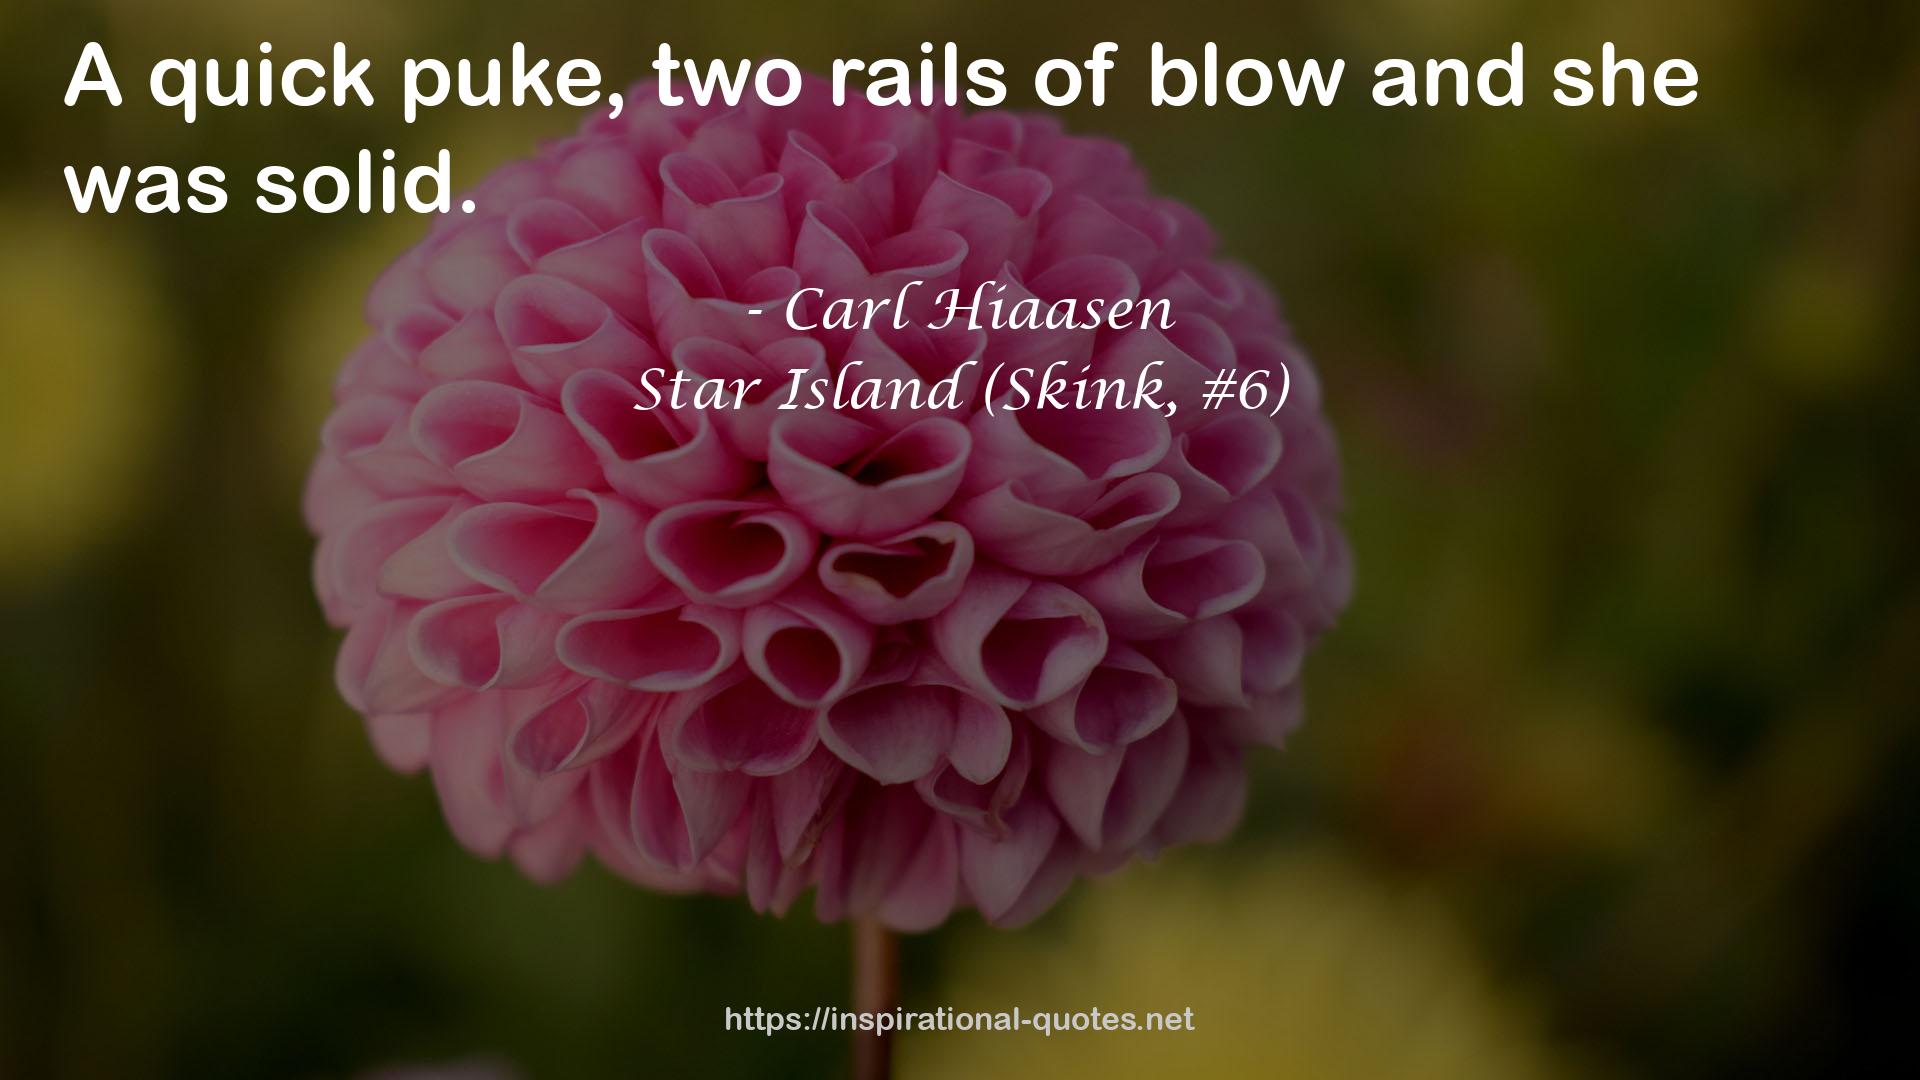 Star Island (Skink, #6) QUOTES